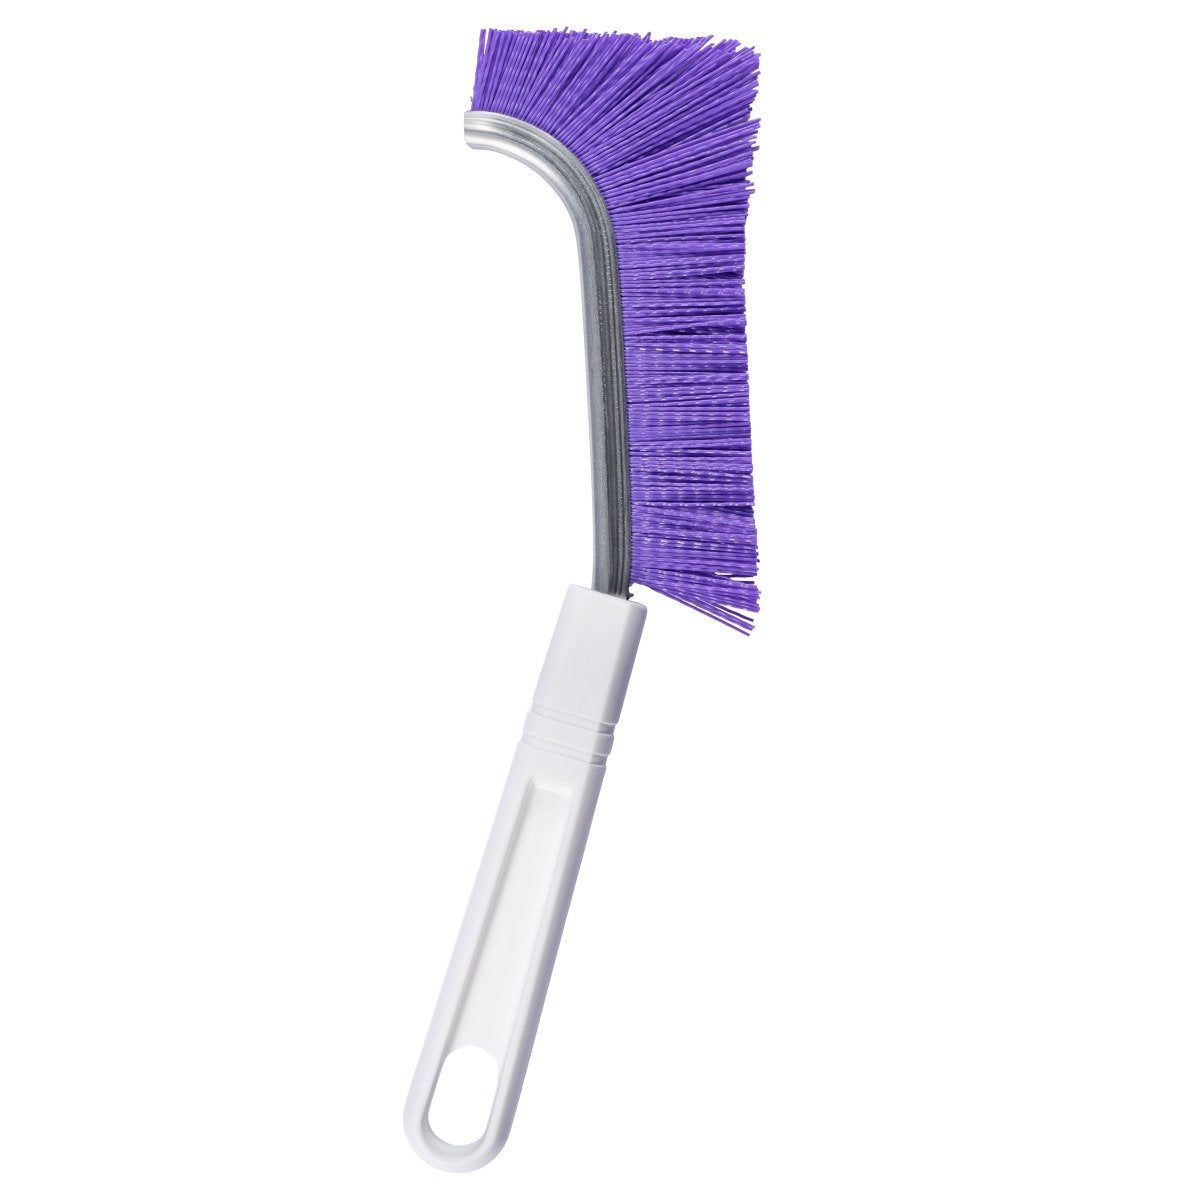 Fuller Brush Barbecue Grill Brush - Heavy Duty Cleaning Scrub w